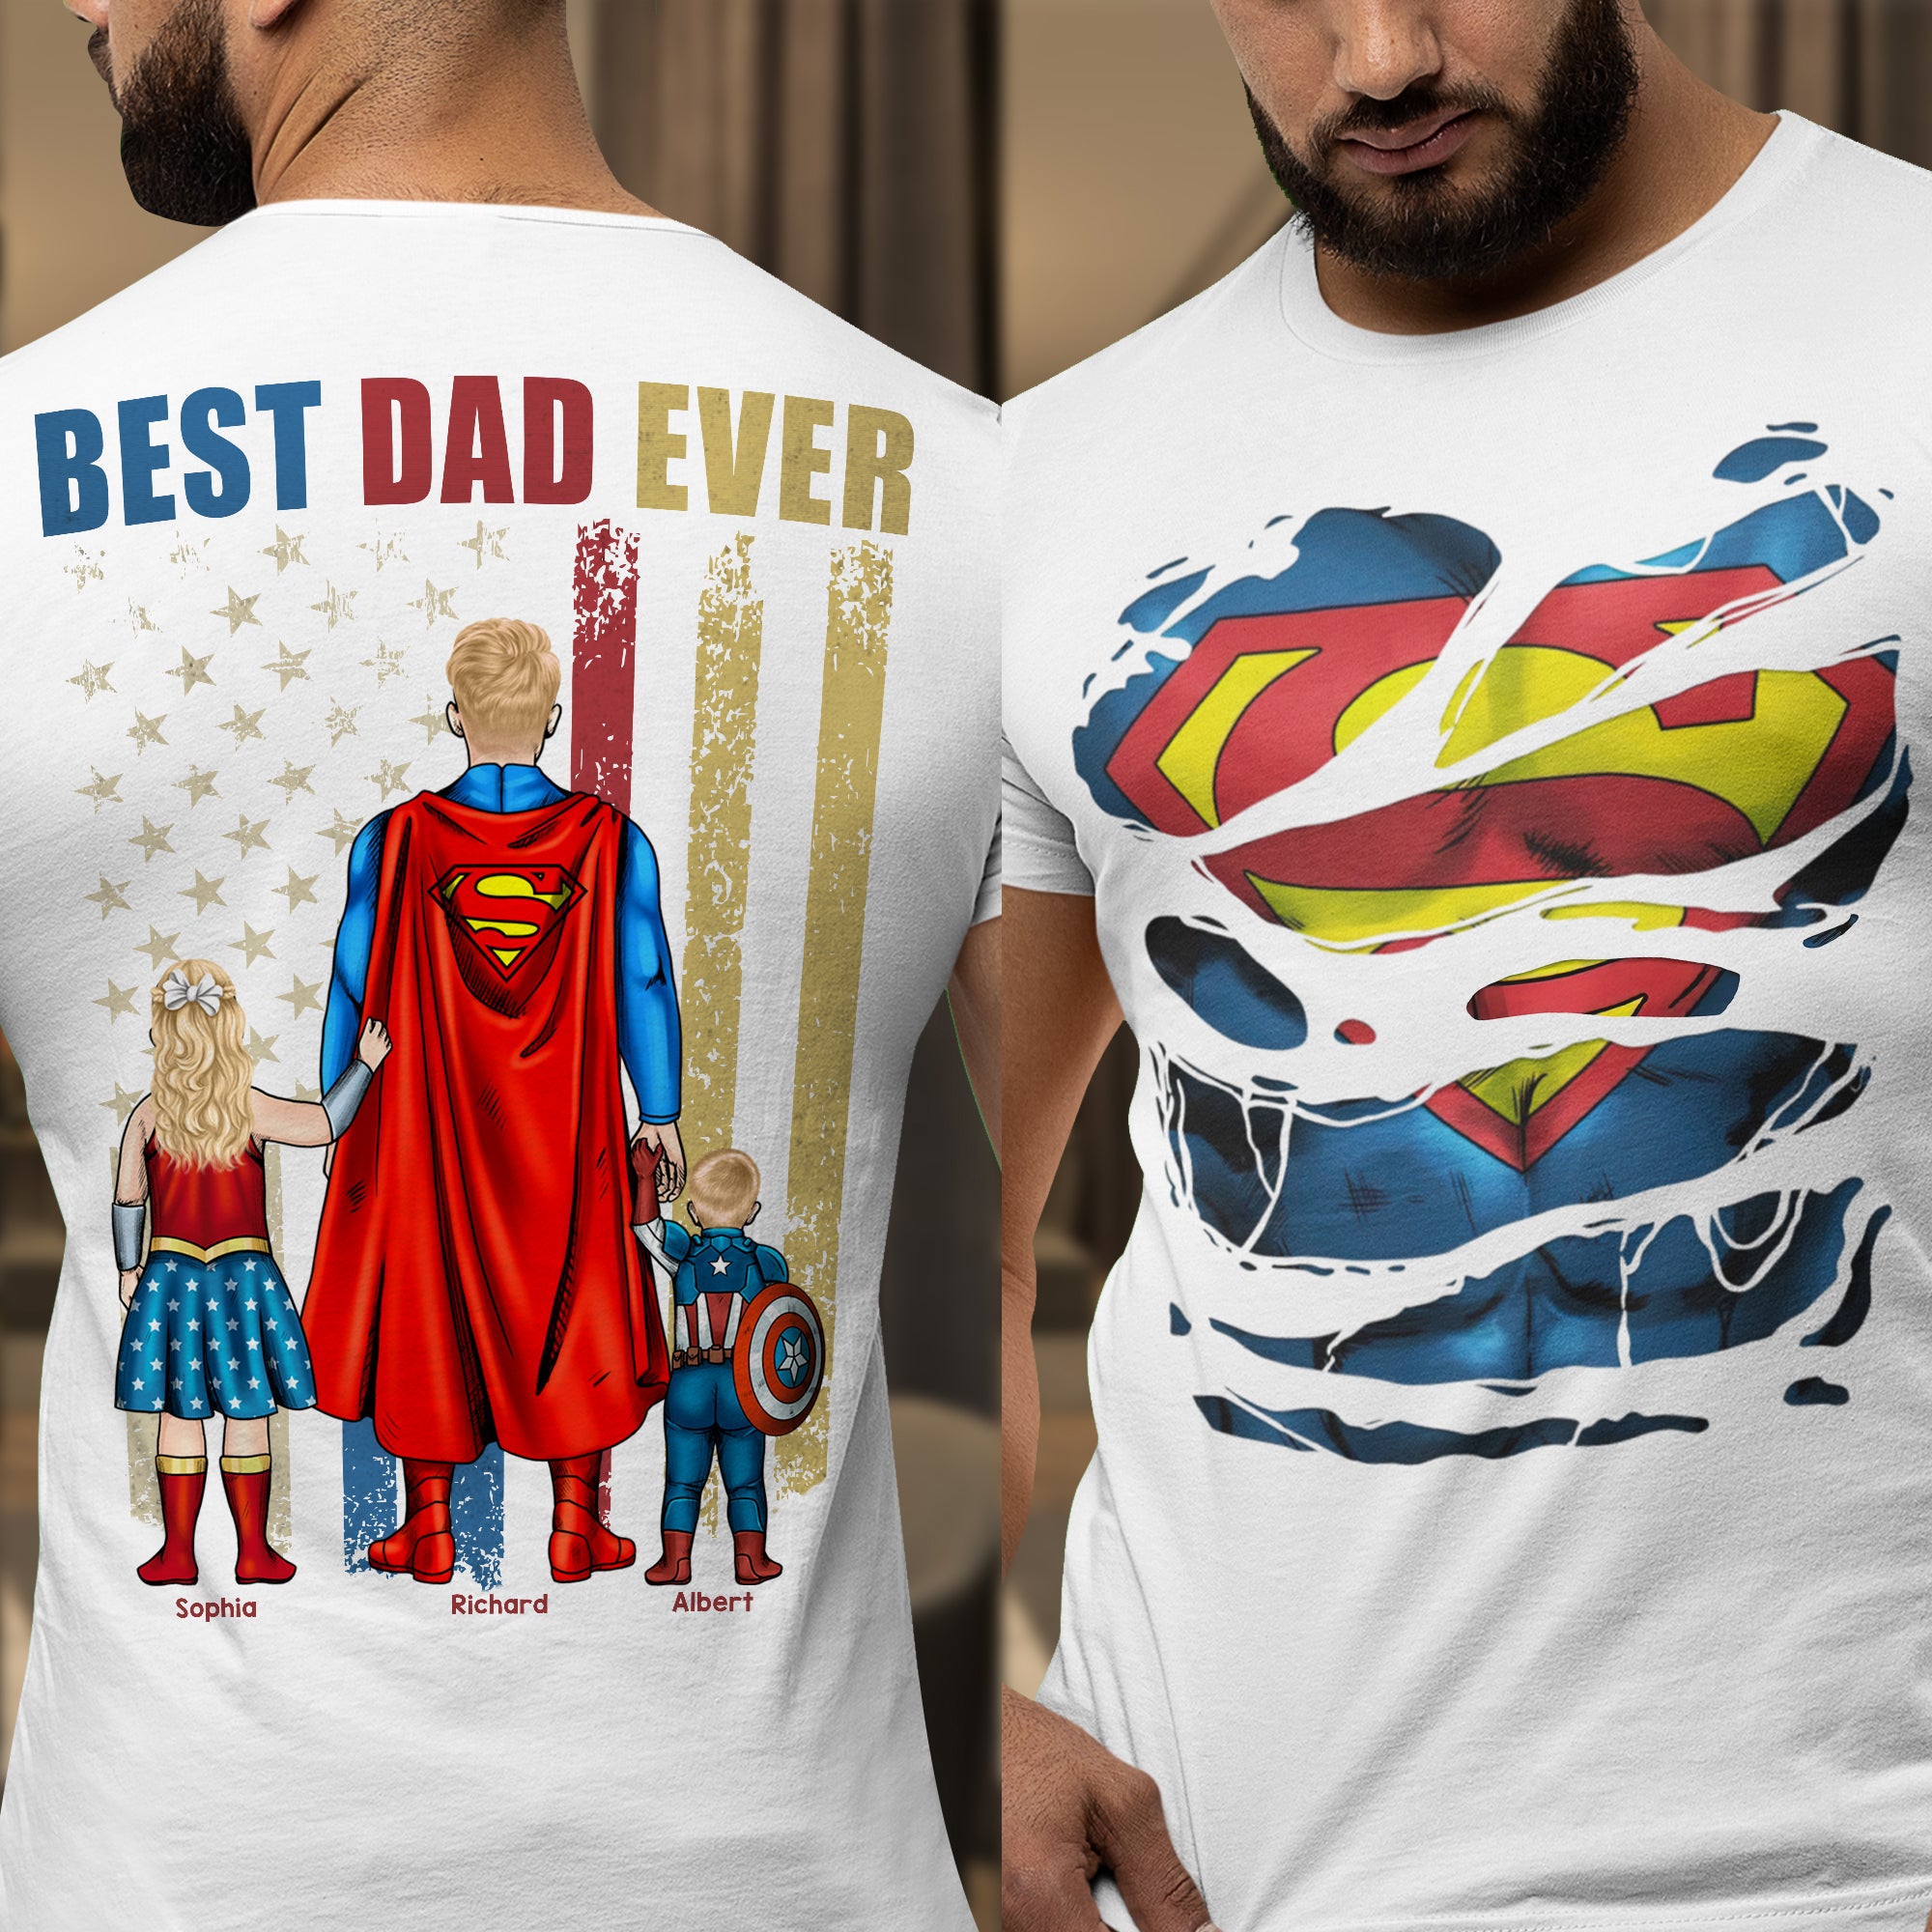 Personalized Gifts For Dad Shirt 051qhqn050424pa-Homacus